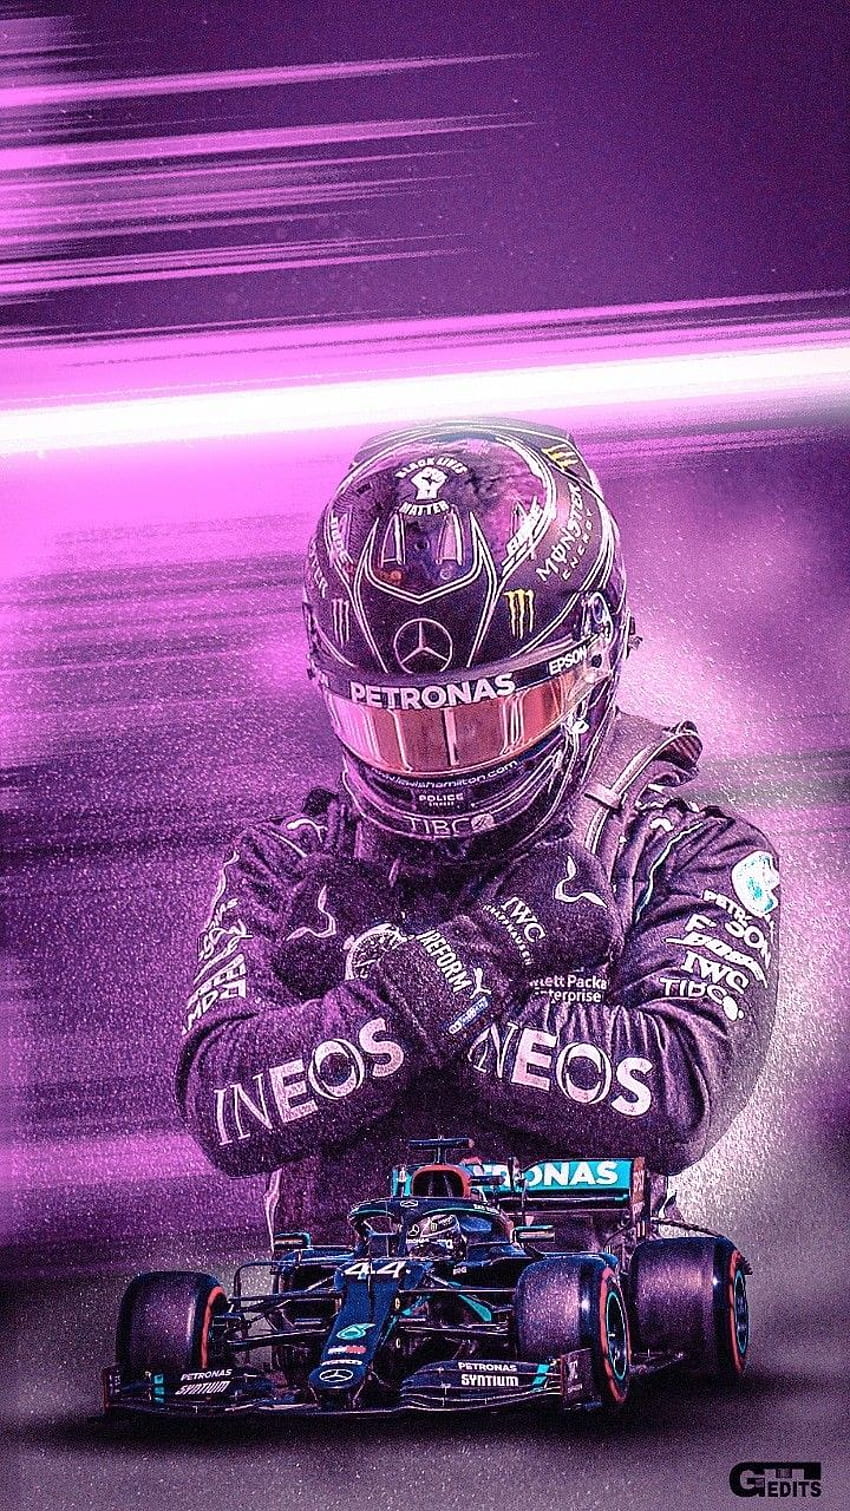 Lewis Hamilton  Mercedes  Phone Wallpaper with and without logo   rFormulaOneWallpapers